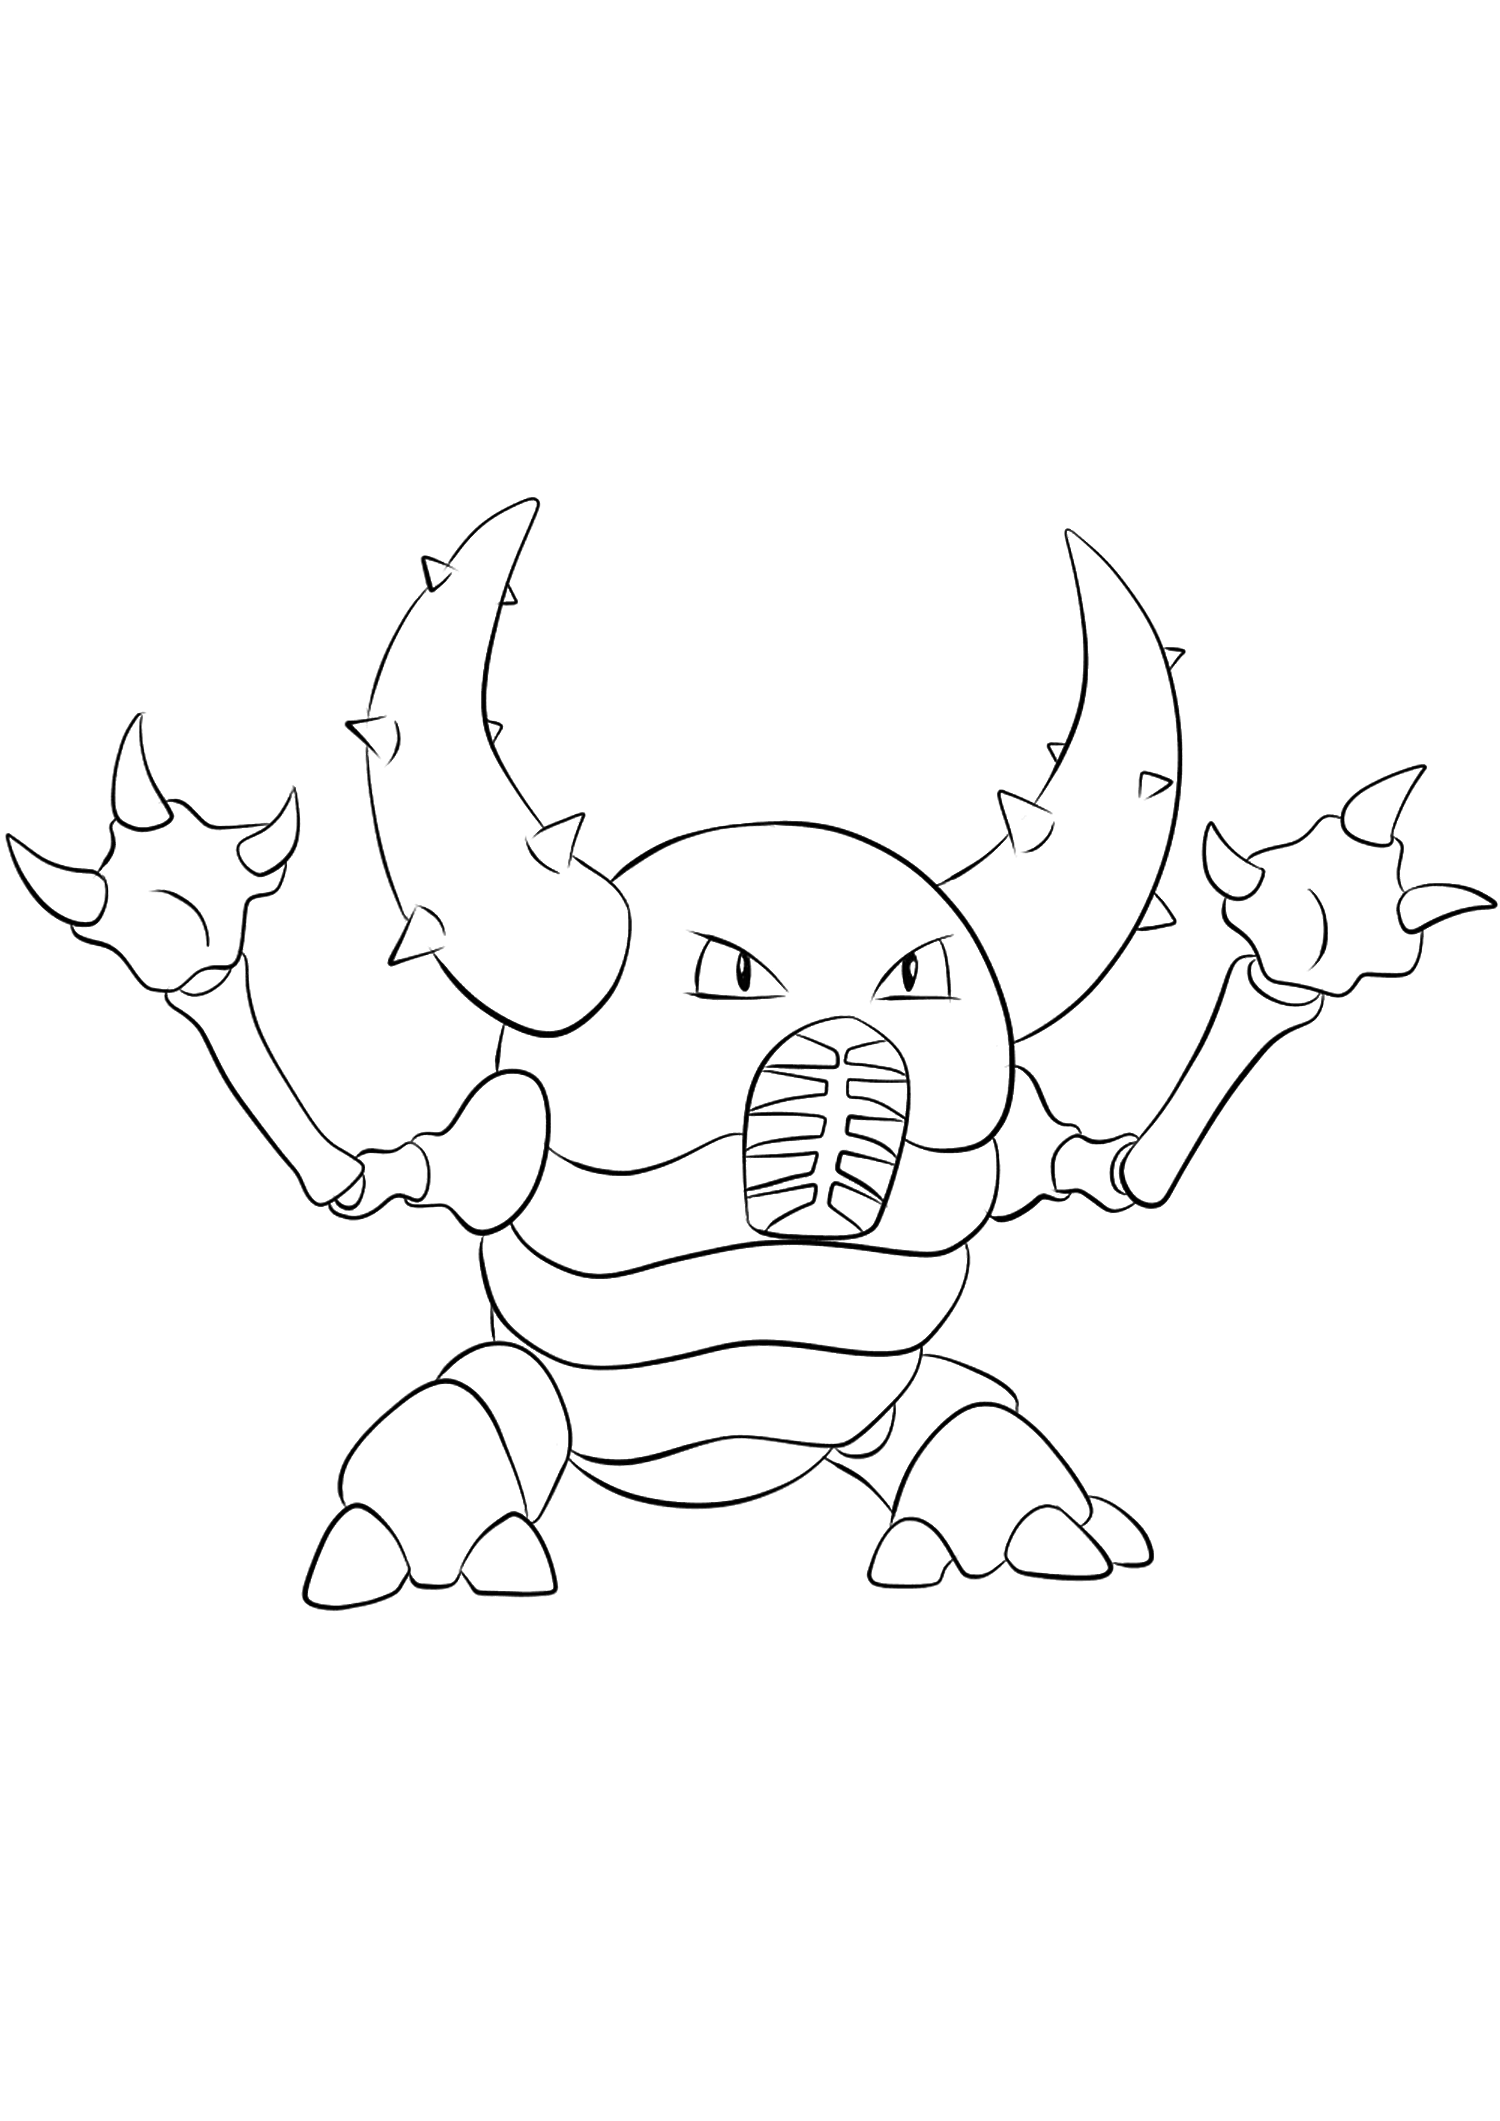 Pinsir (No.127). Pinsir Coloring page, Generation I Pokemon of type BugOriginal image credit: Pokemon linearts by Lilly Gerbil on Deviantart.Permission:  All rights reserved © Pokemon company and Ken Sugimori.